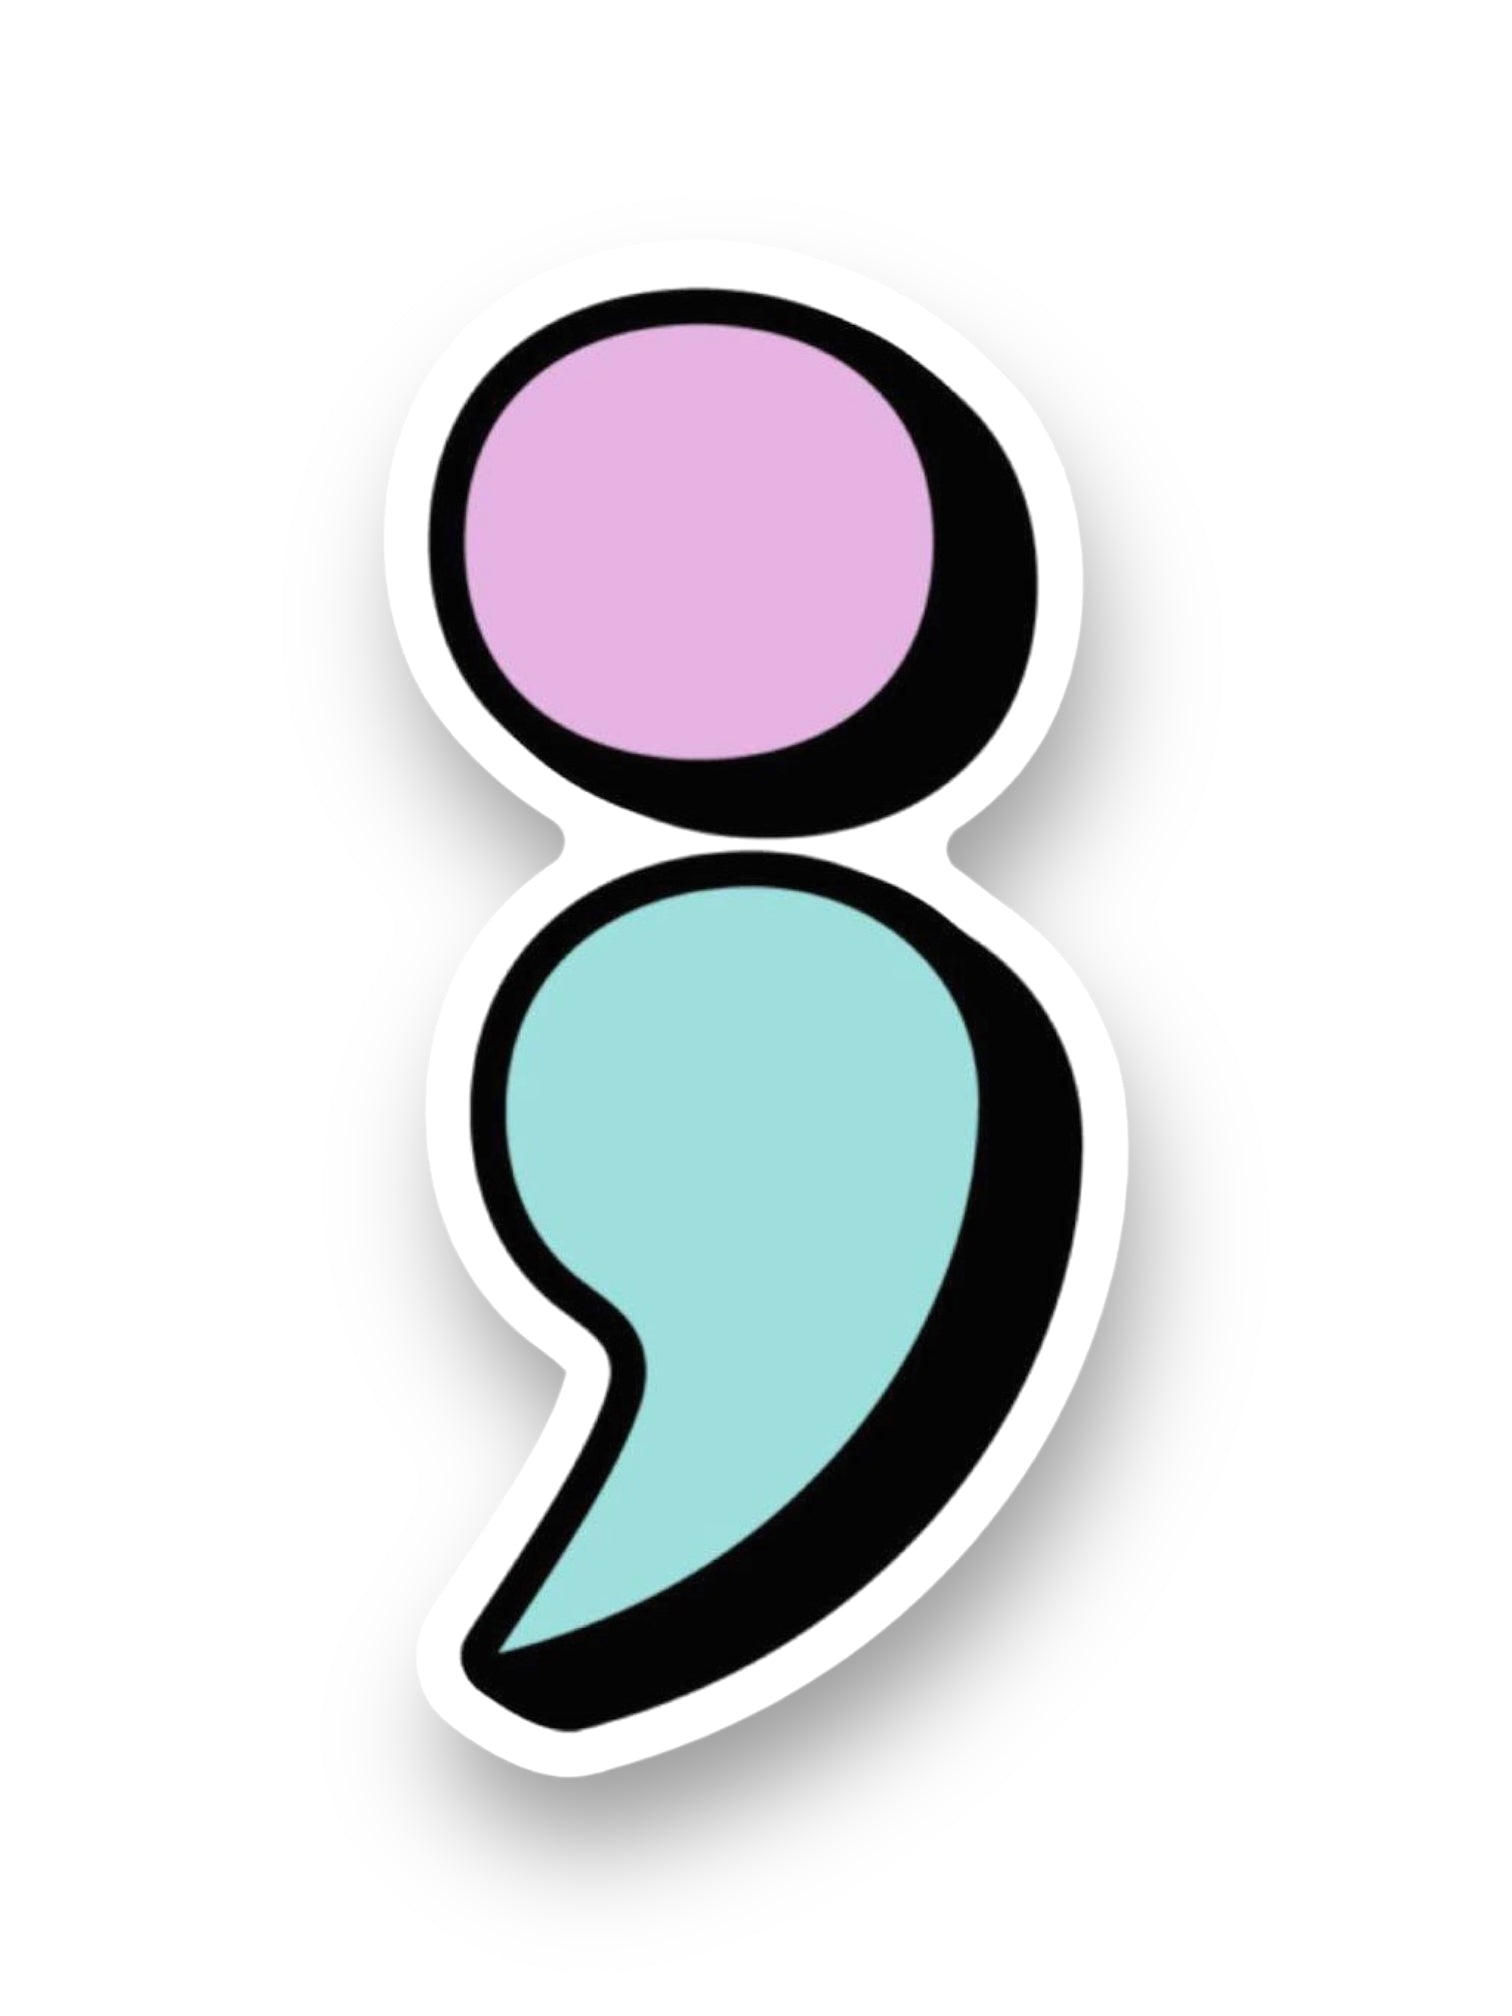 Semicolon, Mental Health Awareness Sticker by Big Moods, Sold by Le Monkey House